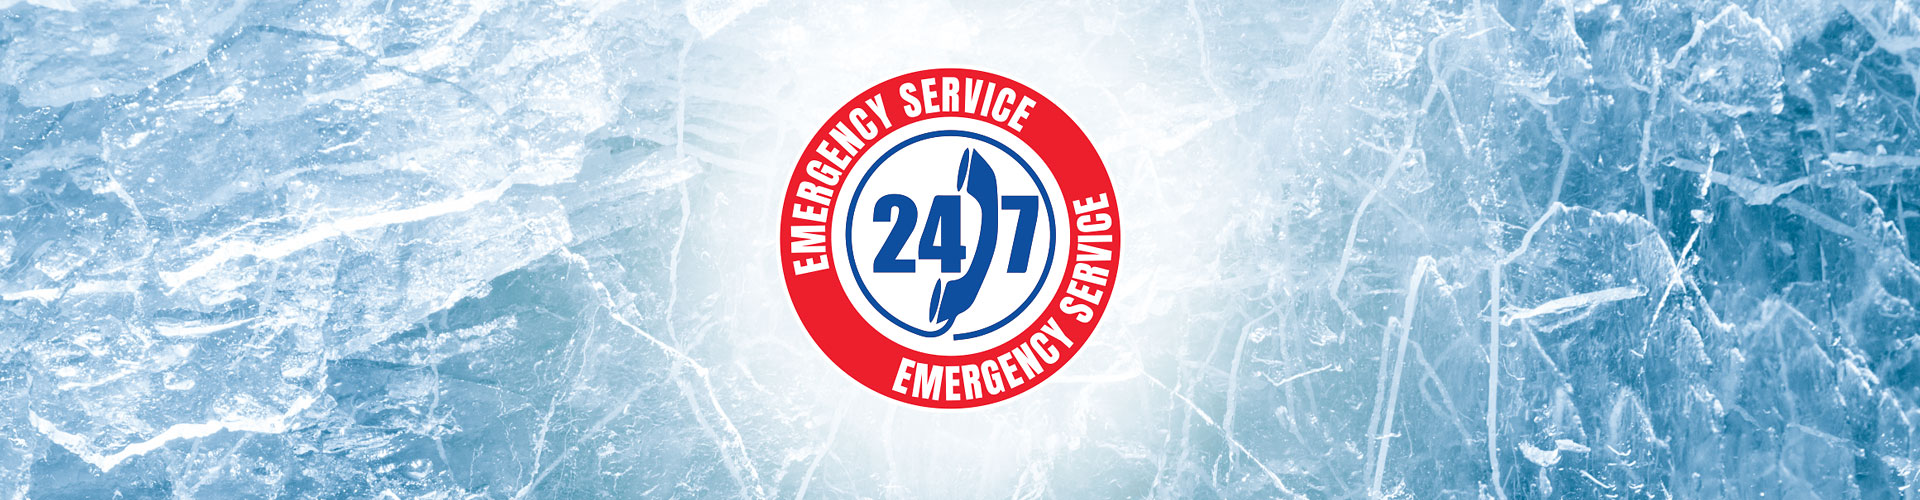 Hometown Heating offers 24/7 Emergency Heating Service for Northeastern CT